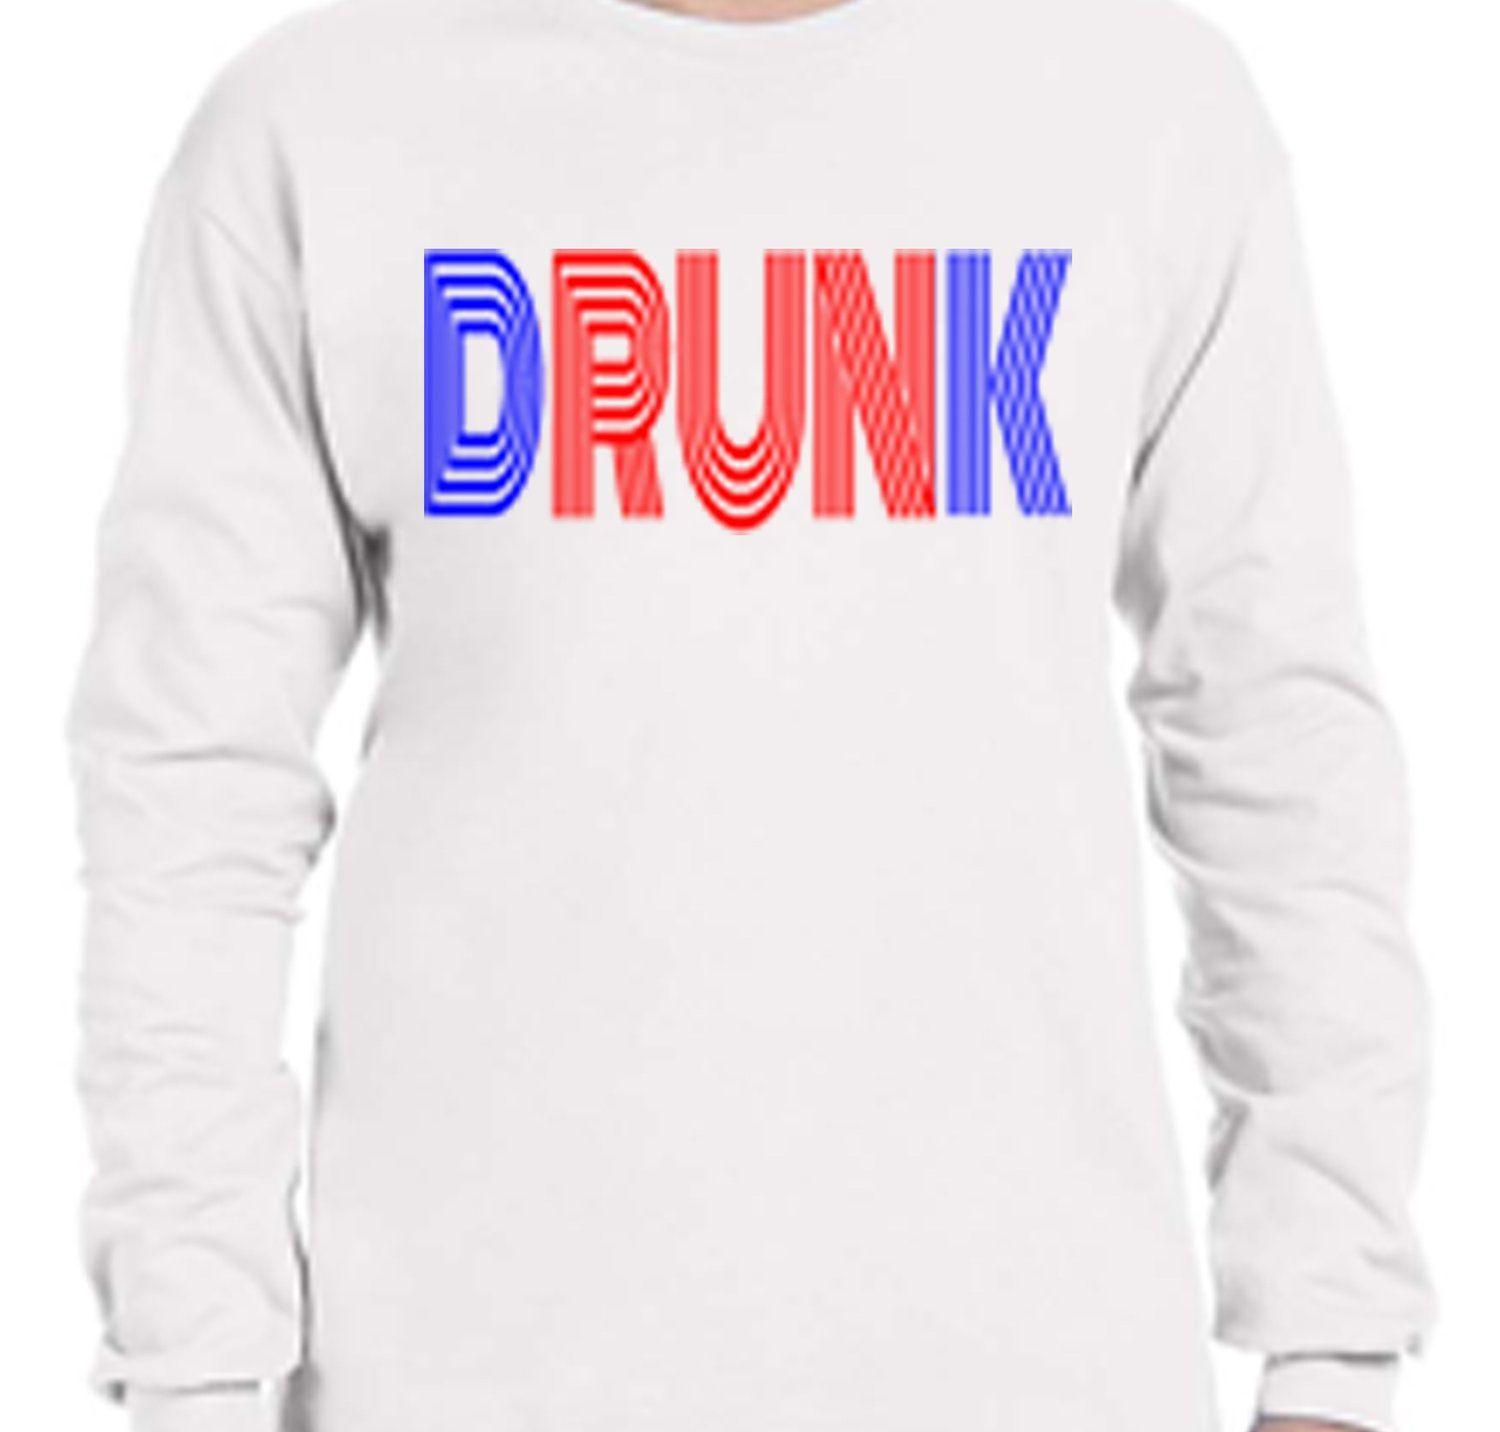 Between Red White and Blue Lines Logo - DRUNK WEAR